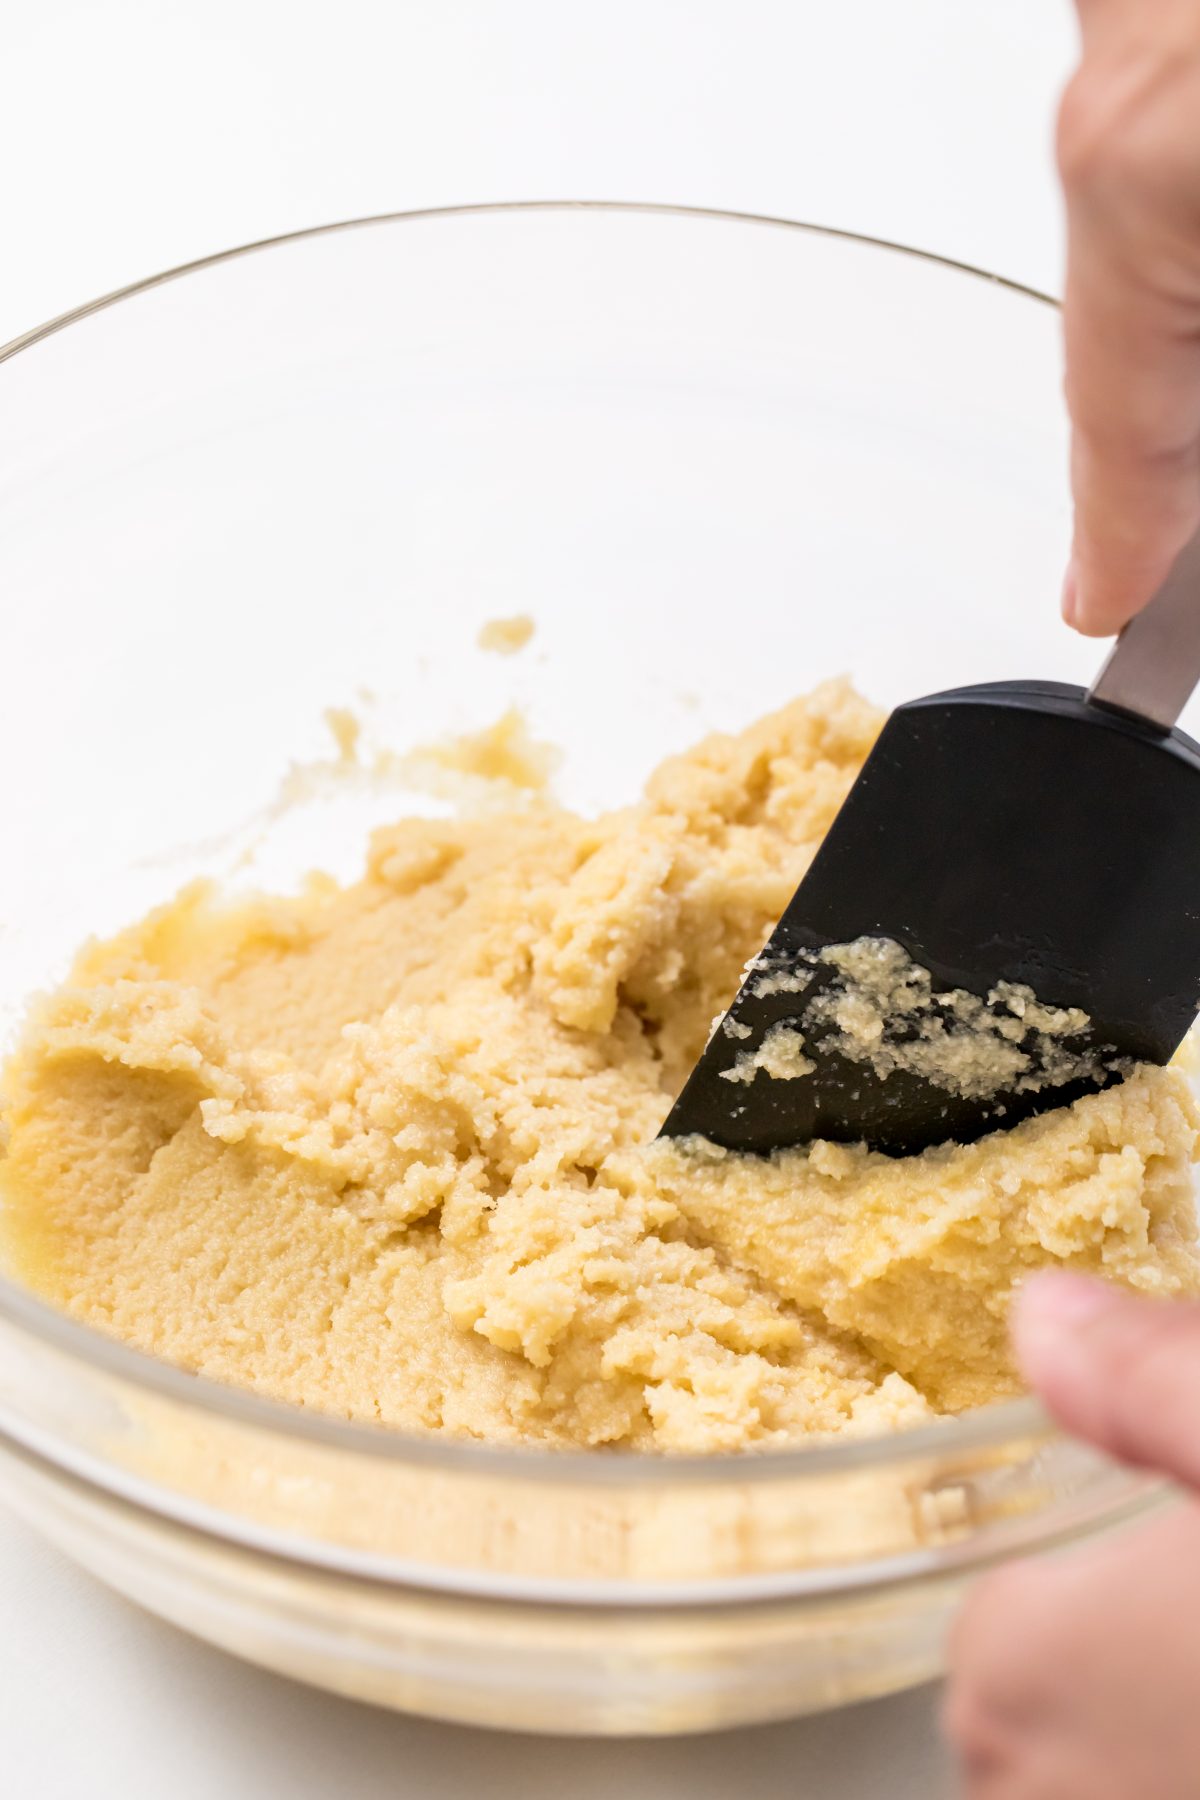 Combine the flour mixture with a rubber spatula.